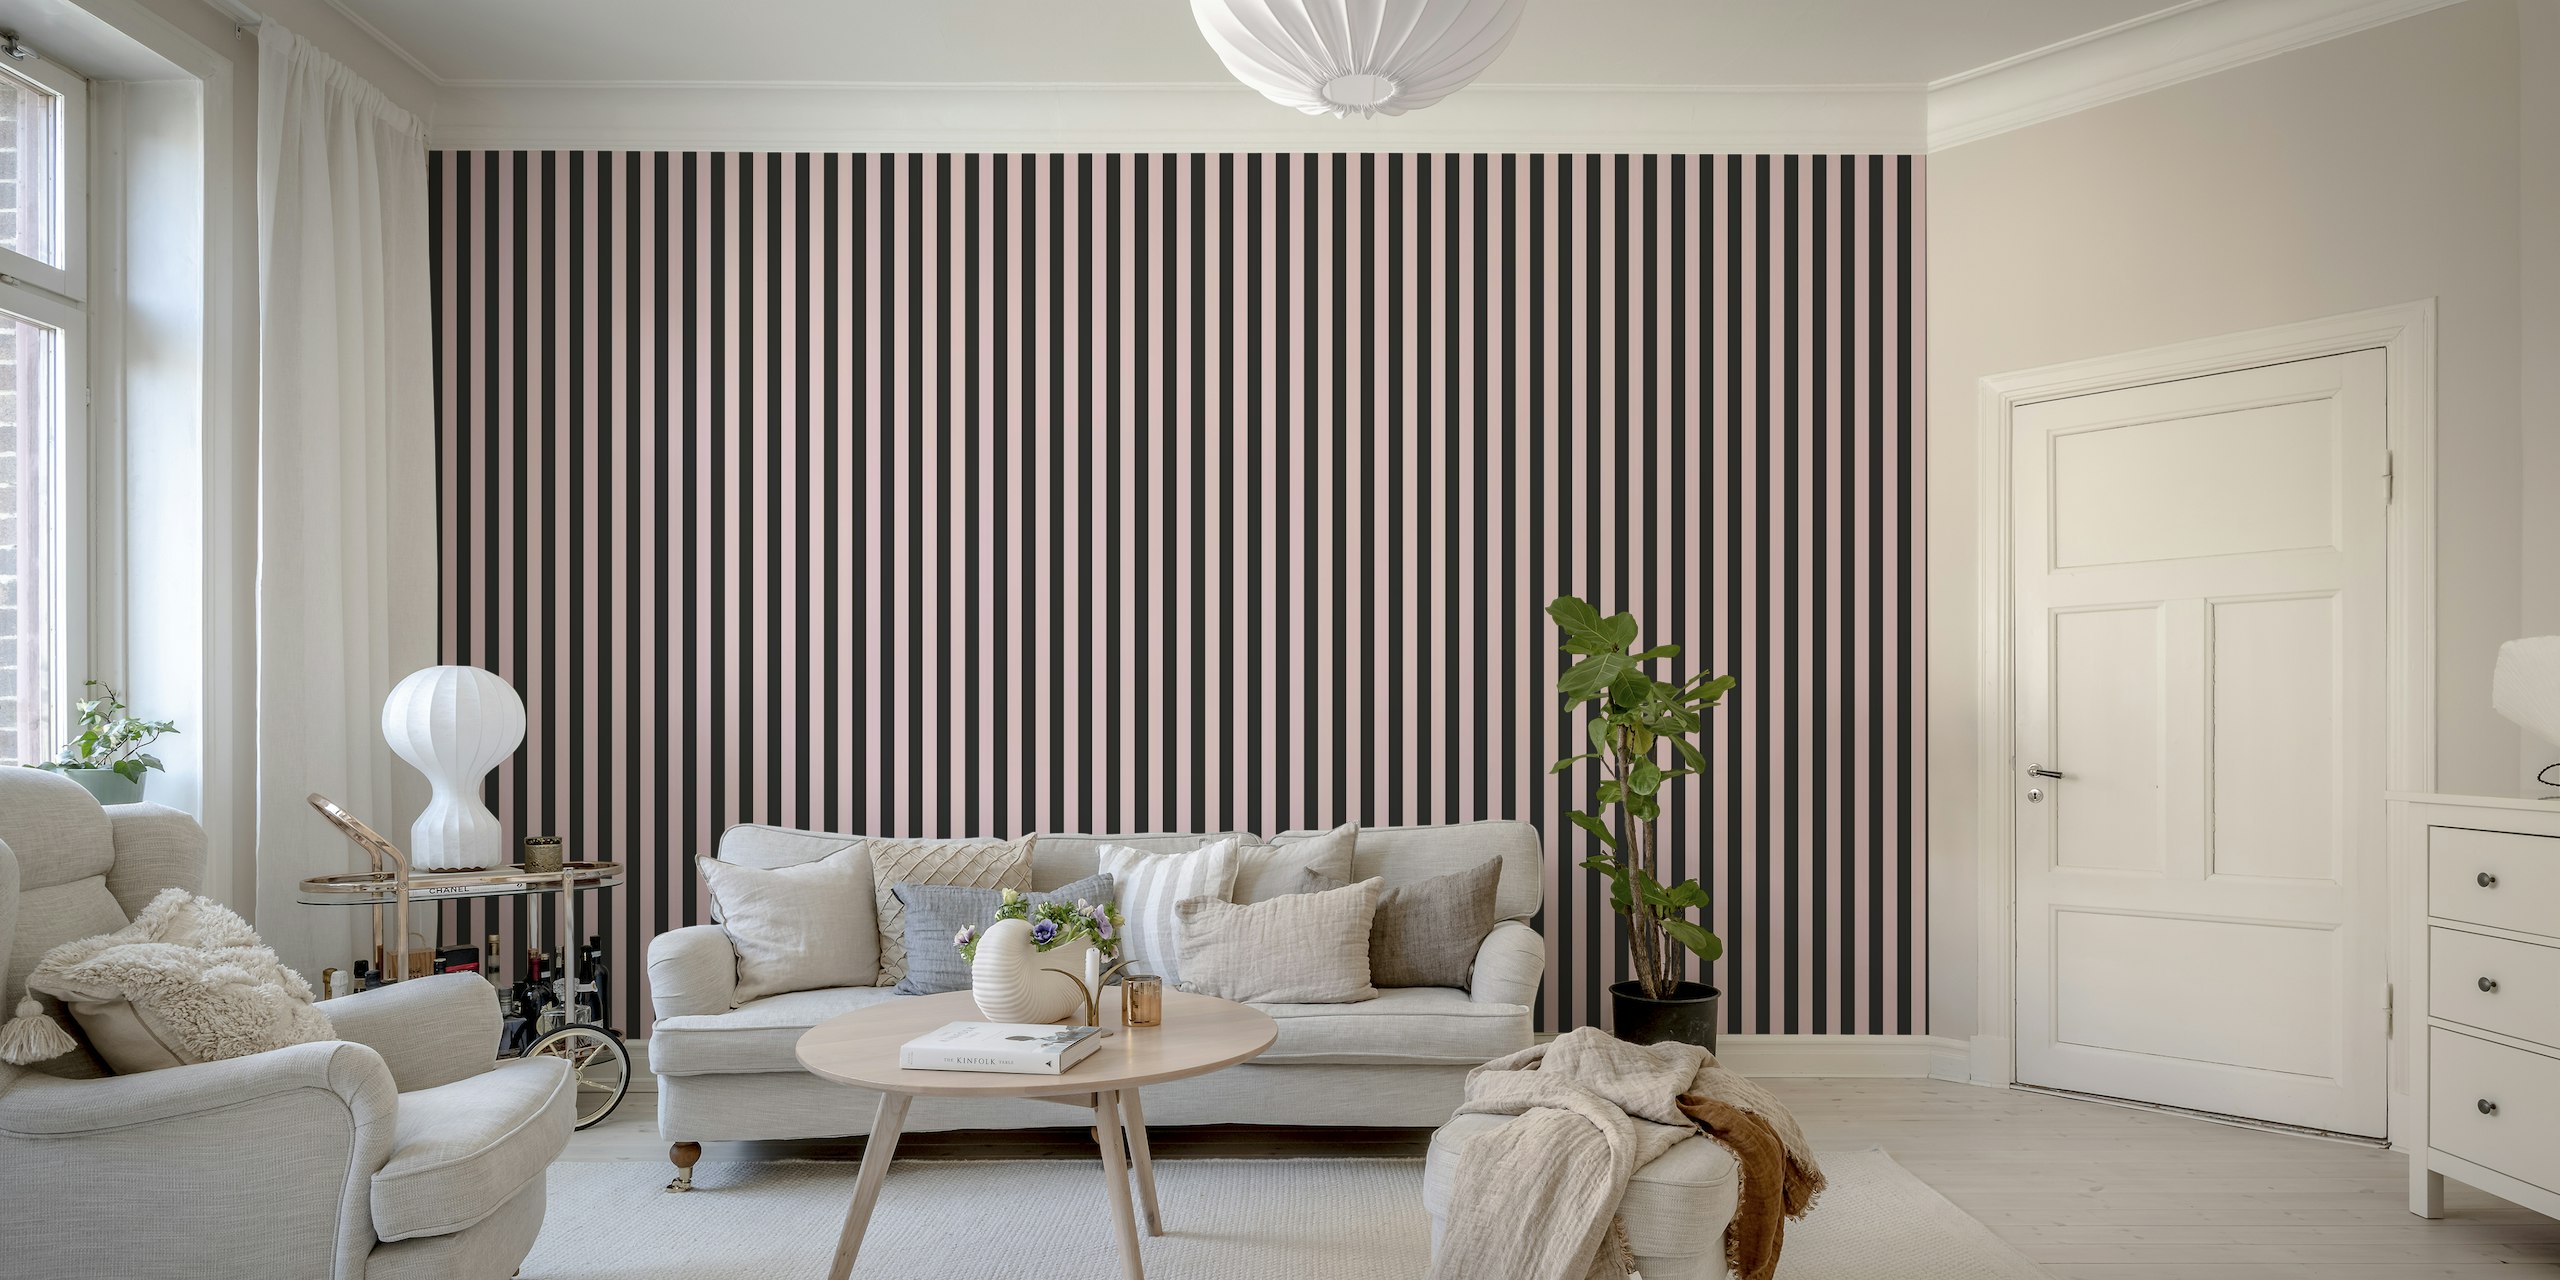 Pink and Black Stripes wallpaper 4 tapete